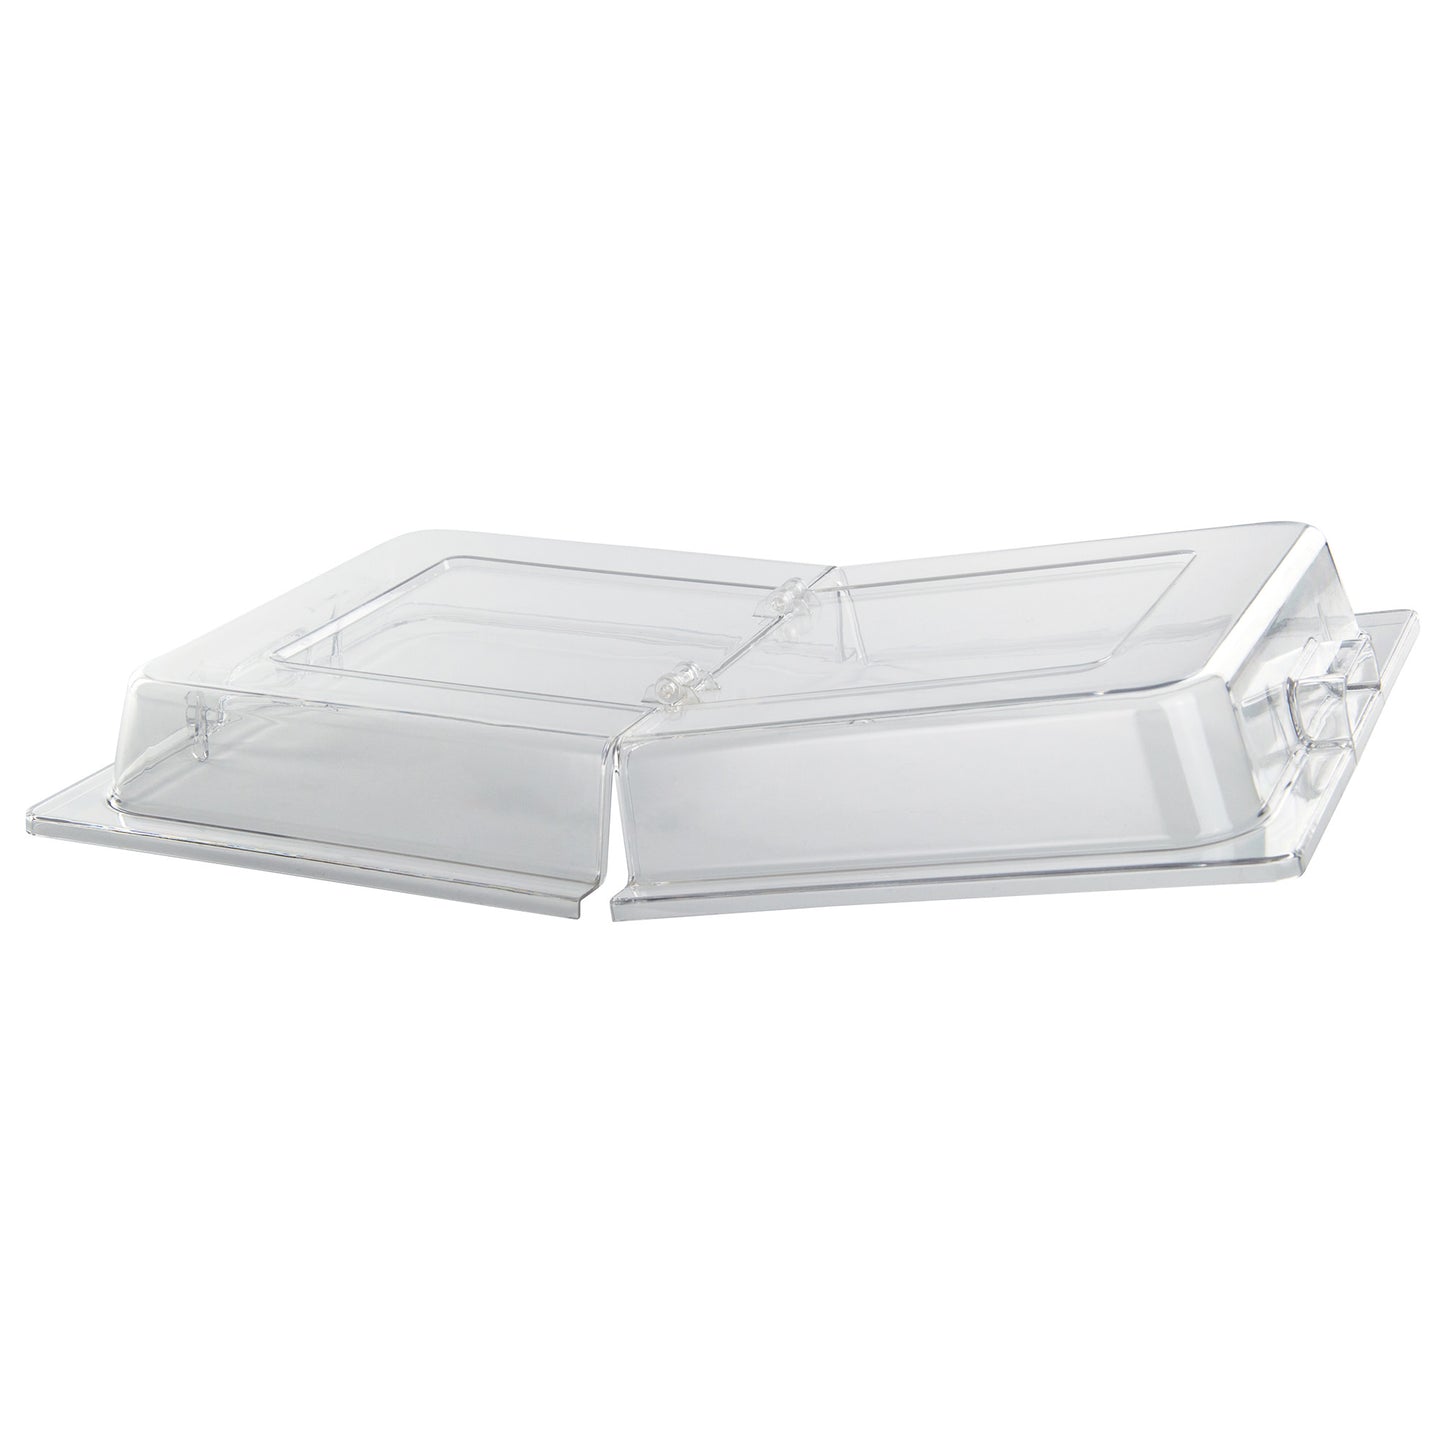 C-DPFH - Dome Cover, Full-Size, Hinged Opening, Polycarbonate